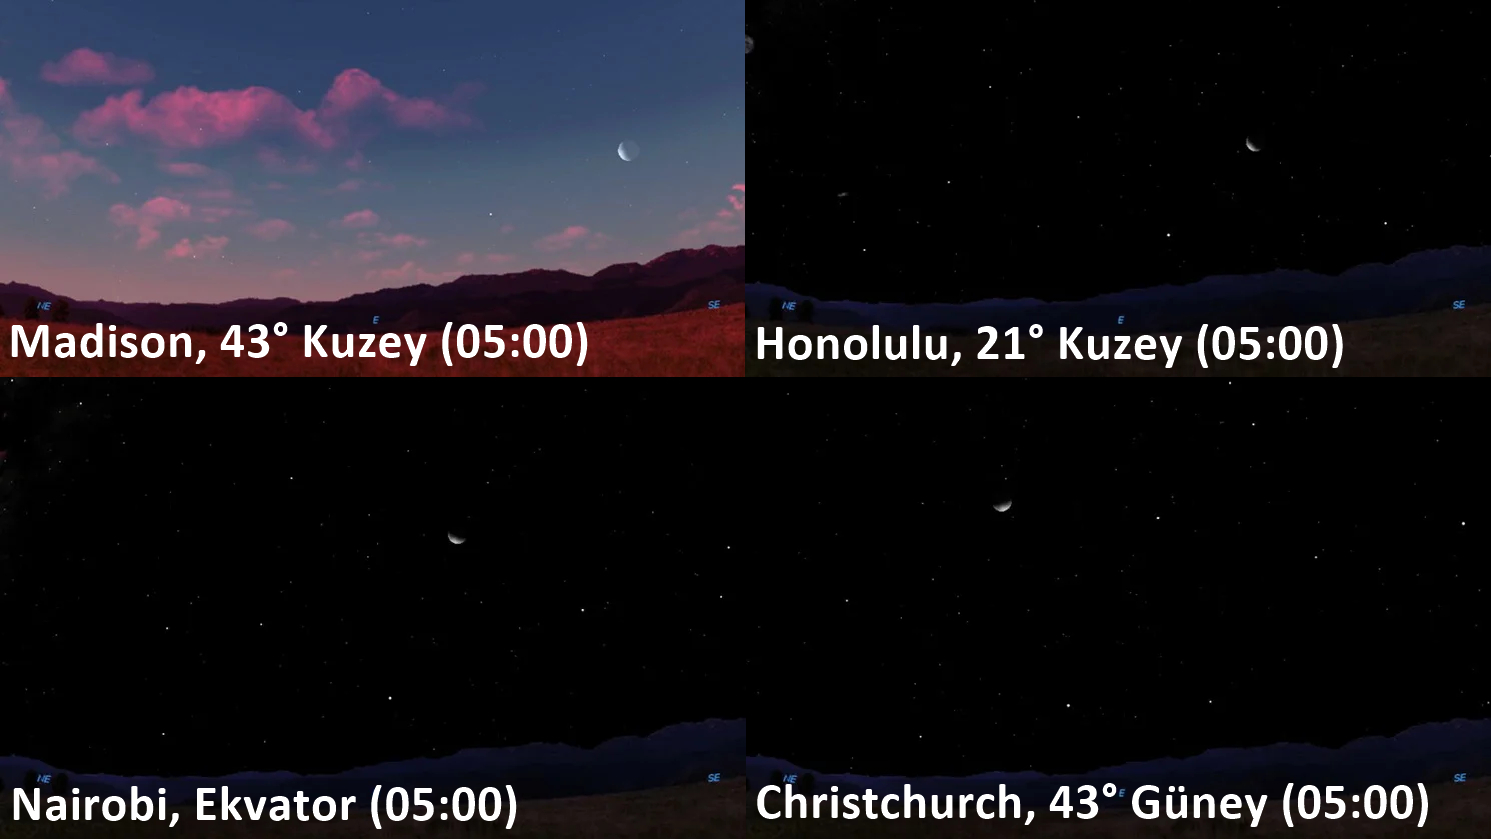 Observations of the moon from different places at different angles